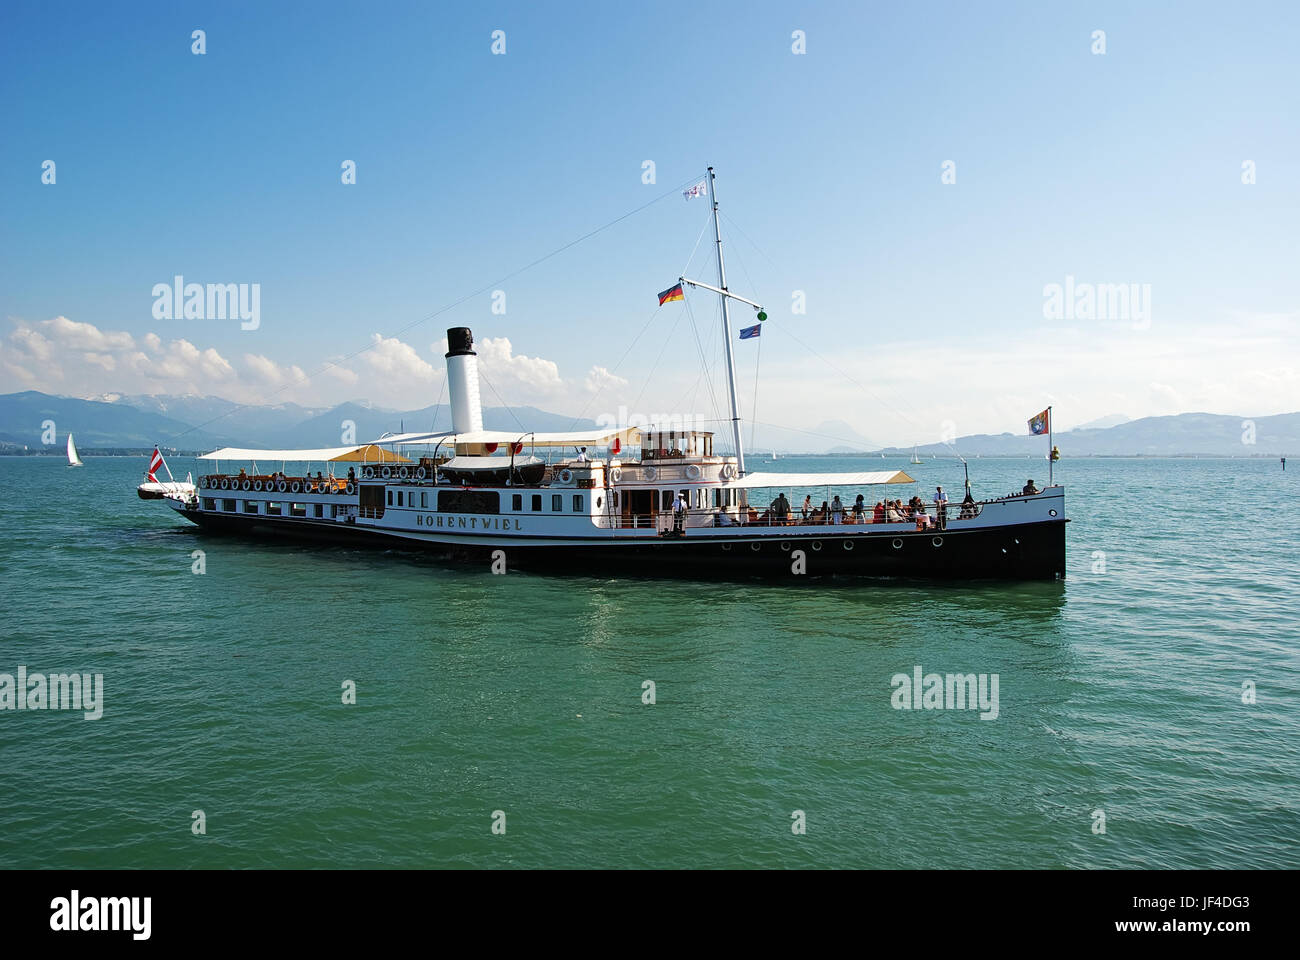 Paddle Wheel Steamer Hohentwiel Stock Photo